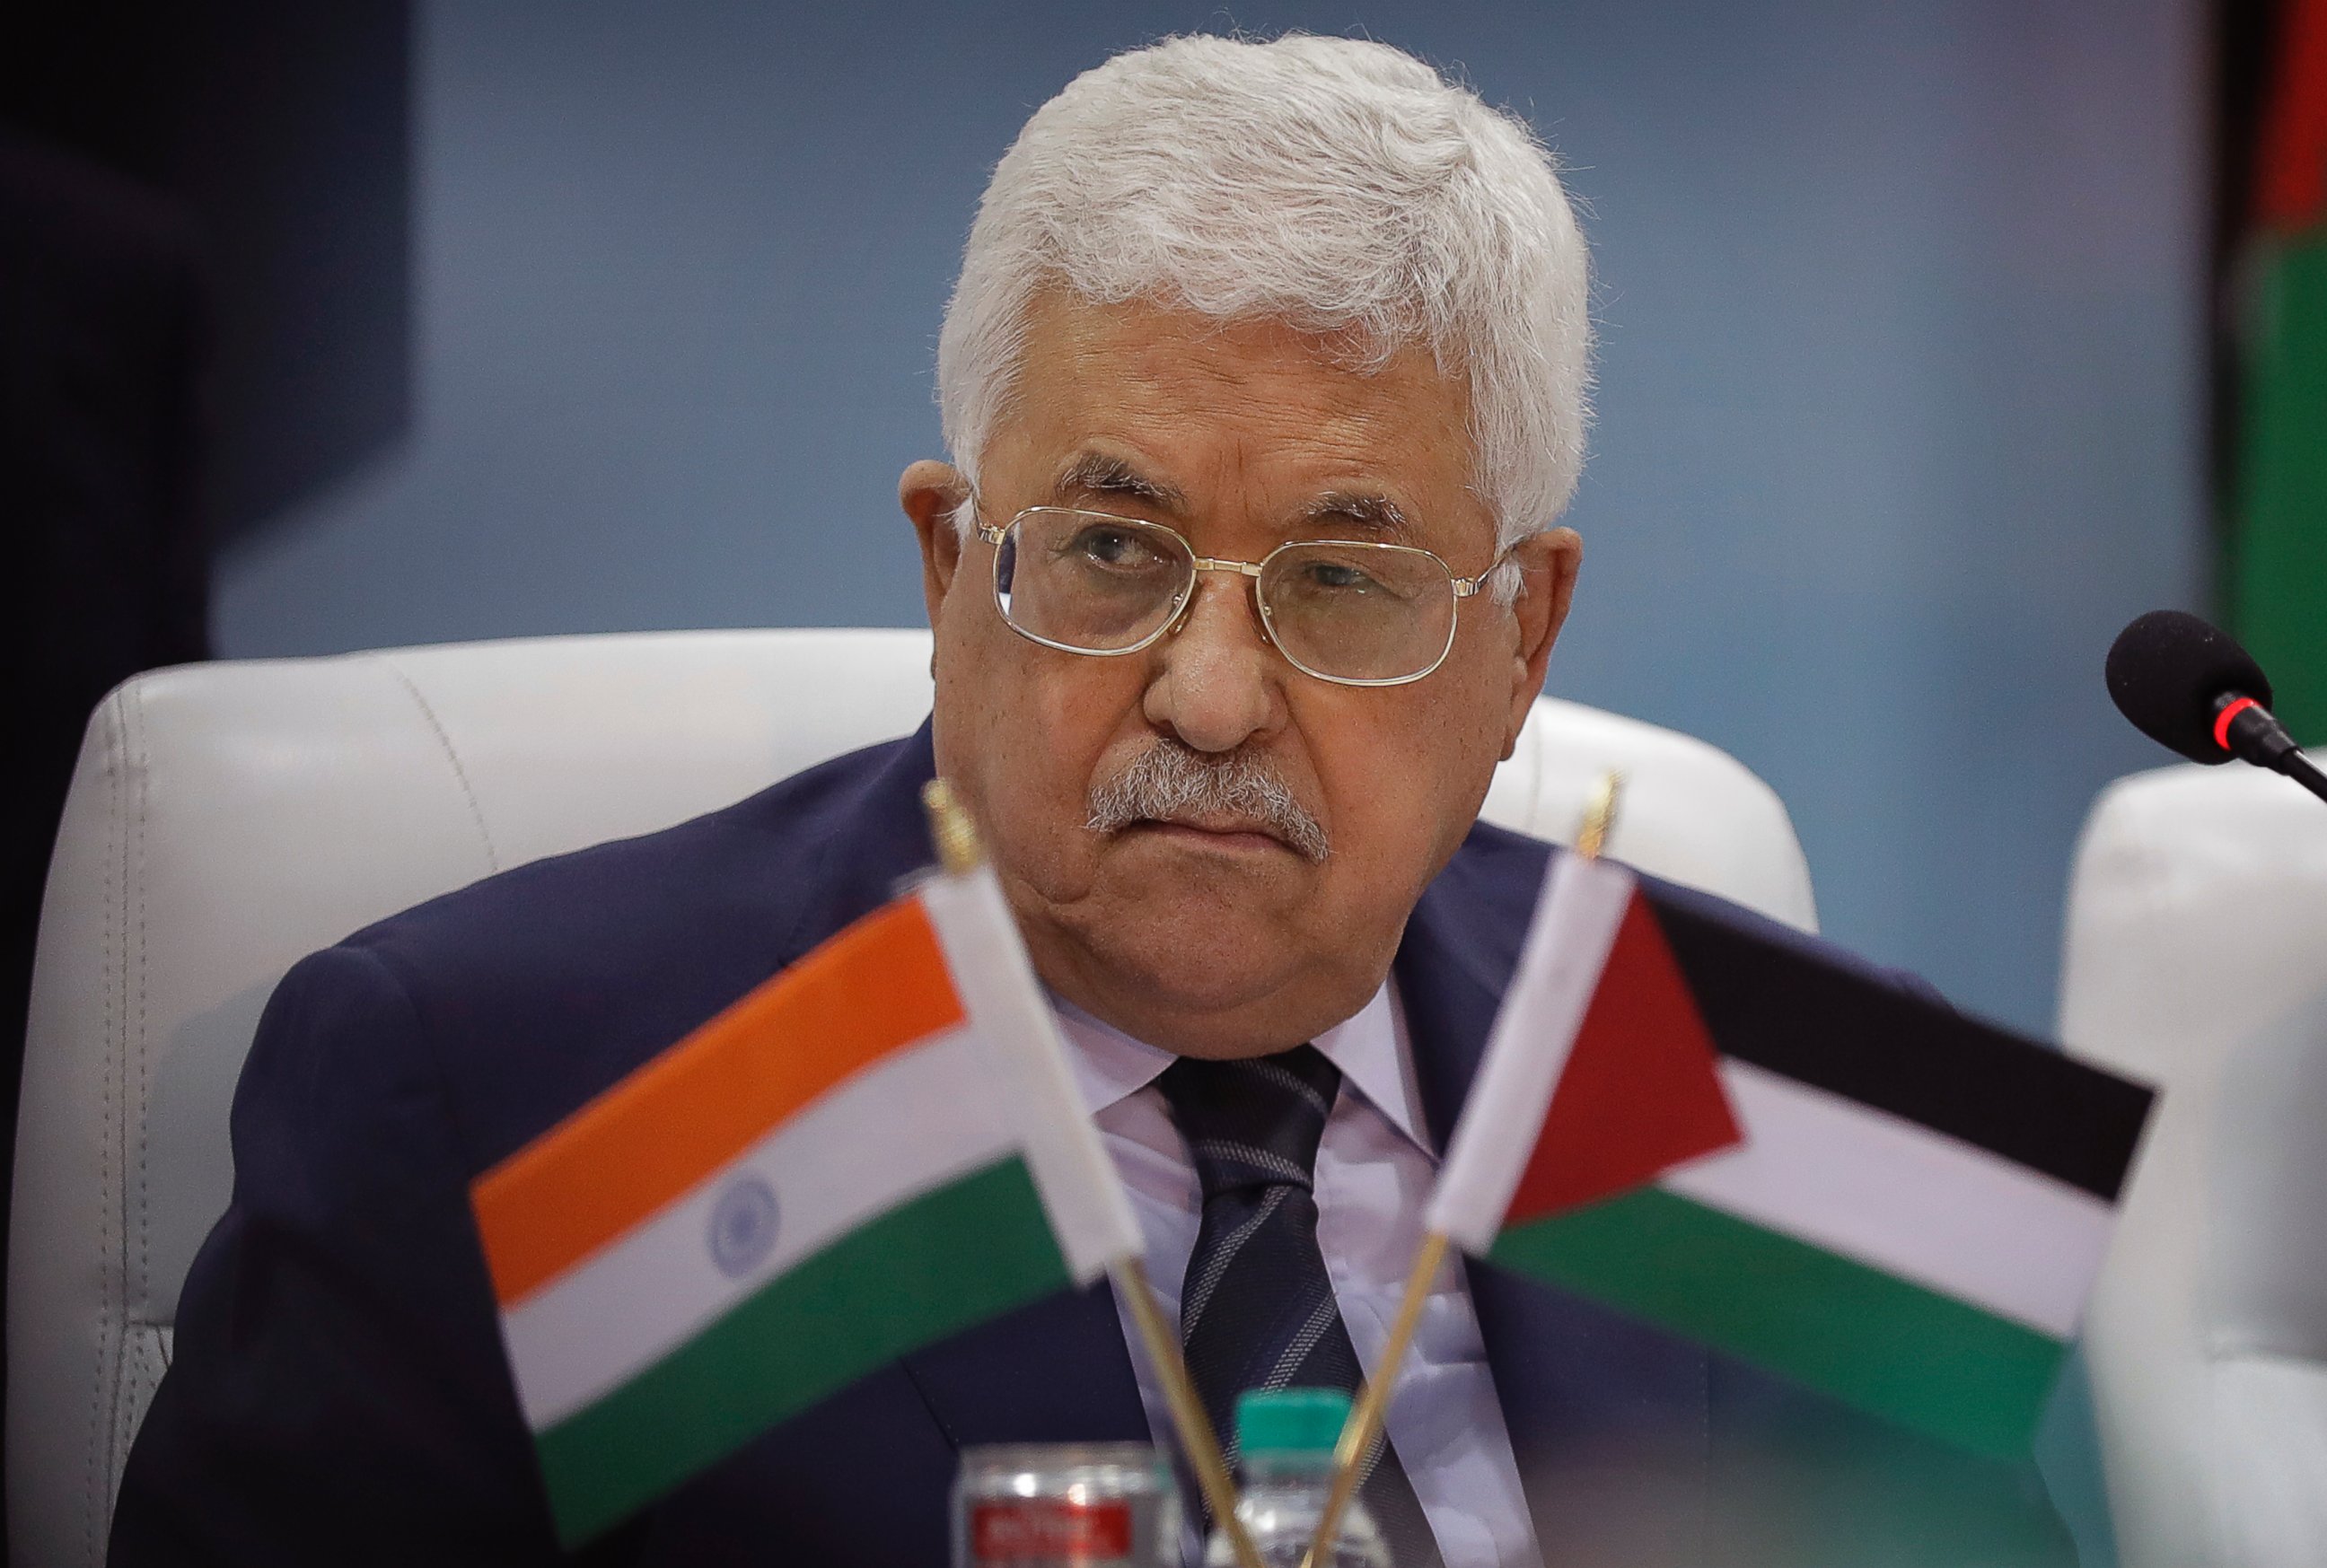 PHOTO: Palestinian President Mahmoud Abbas listens to a speaker during his visit to the Centre for Development of Advance Computing in Noida on the outskirts of New Delhi, India, May 15, 2017. 